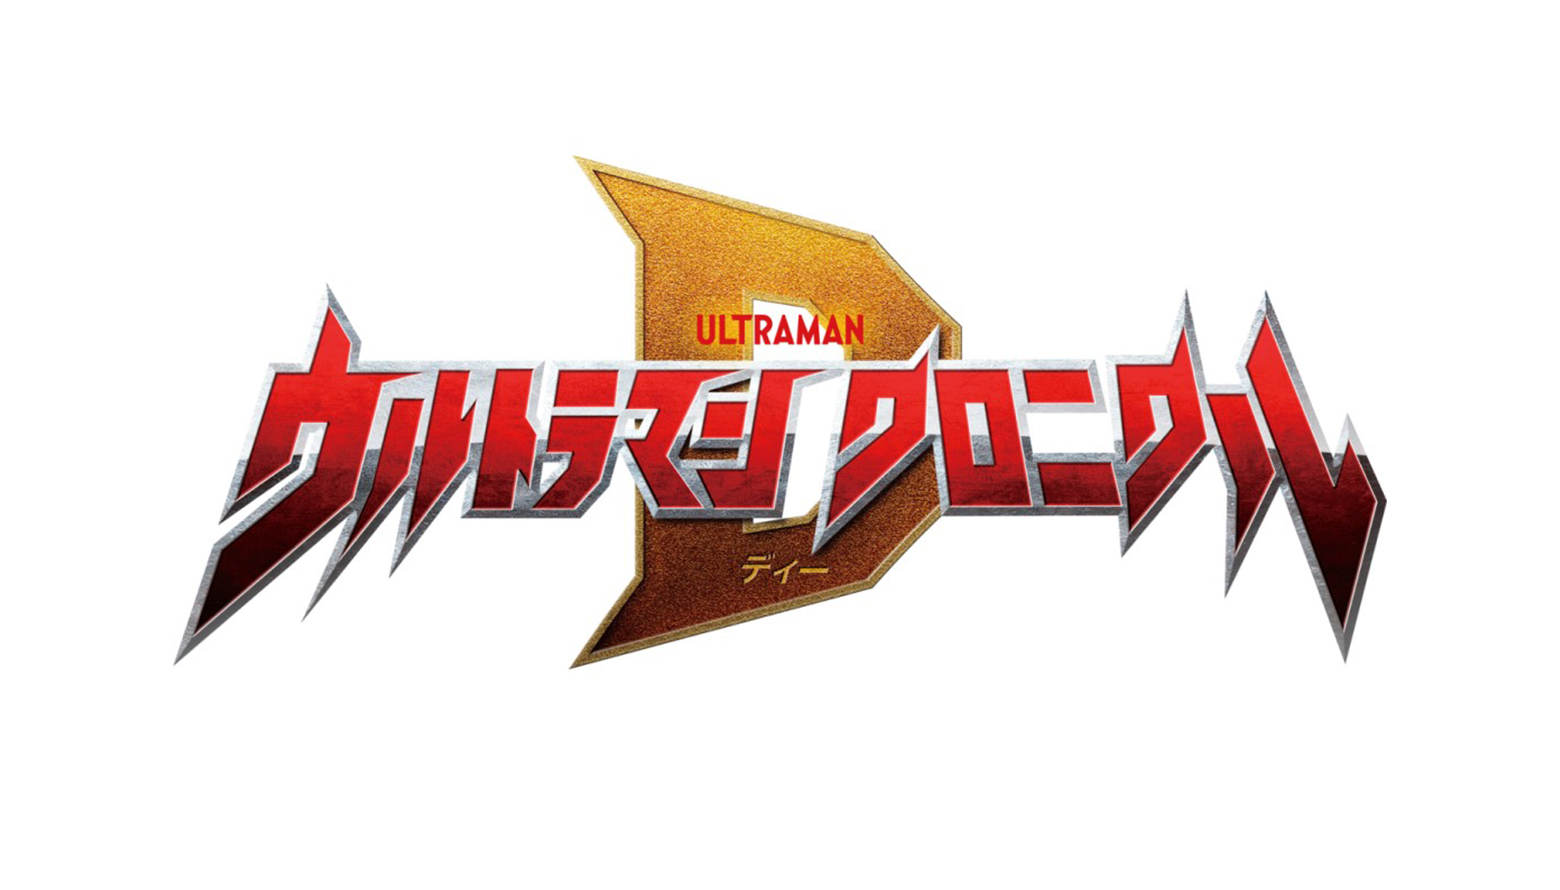 New TV Show ULTRAMAN CHRONICLE D Premieres January 29, 2022 (Sat) at 9 AM on TV Tokyo Network Channels!